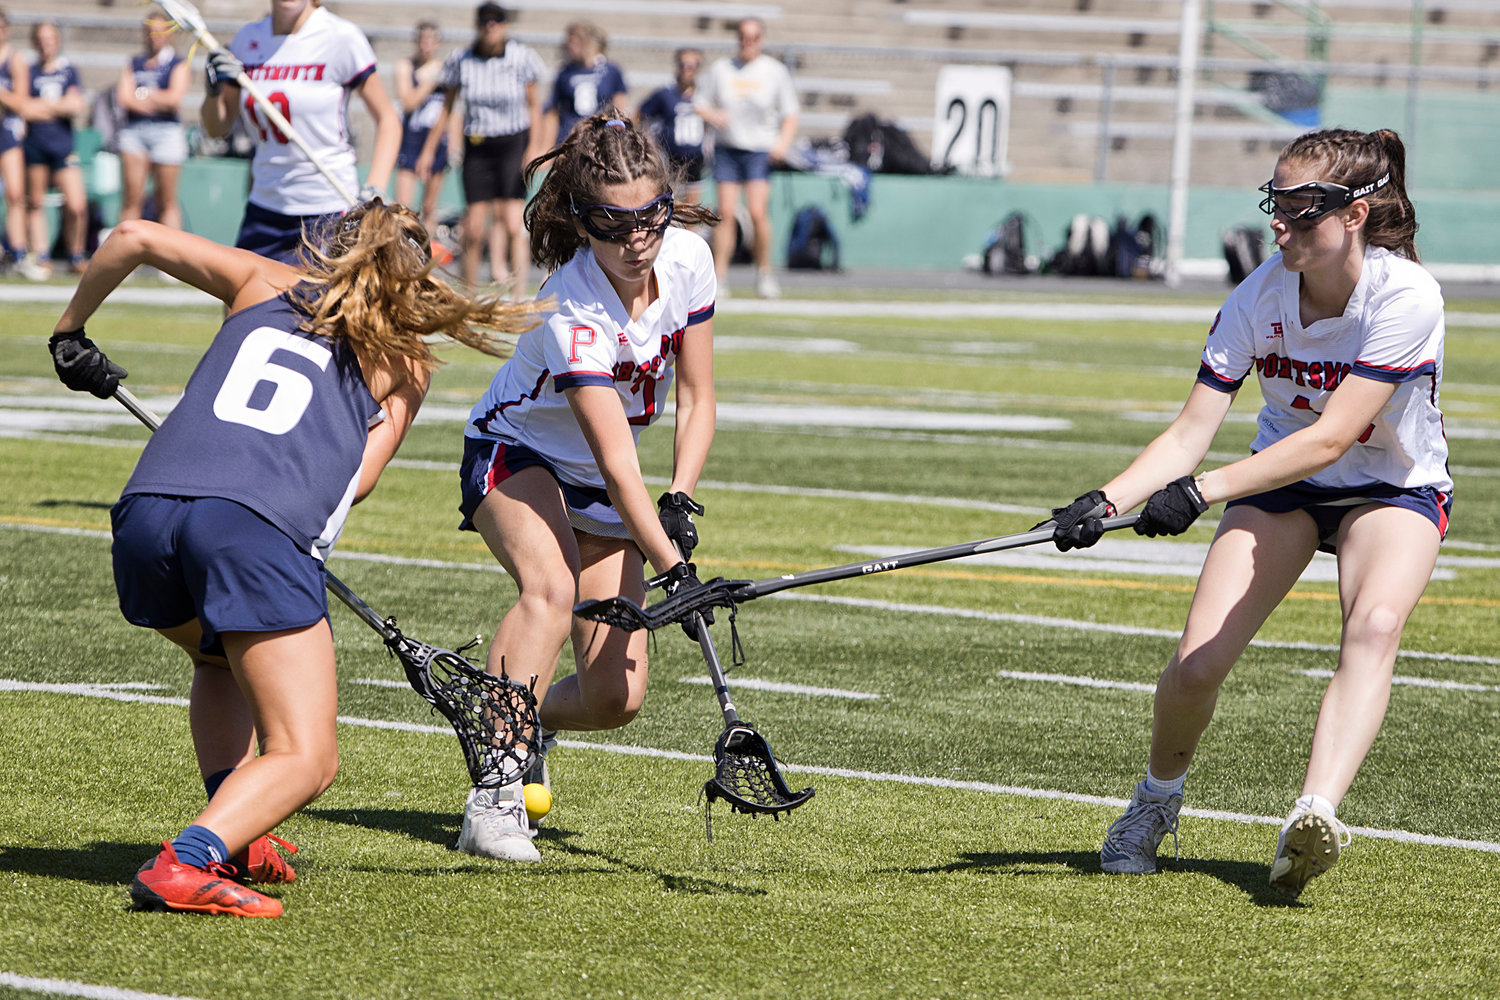 Margaux Boneu (left) and Nora Cooney battle a Burrillville opponent for possession of the ball.